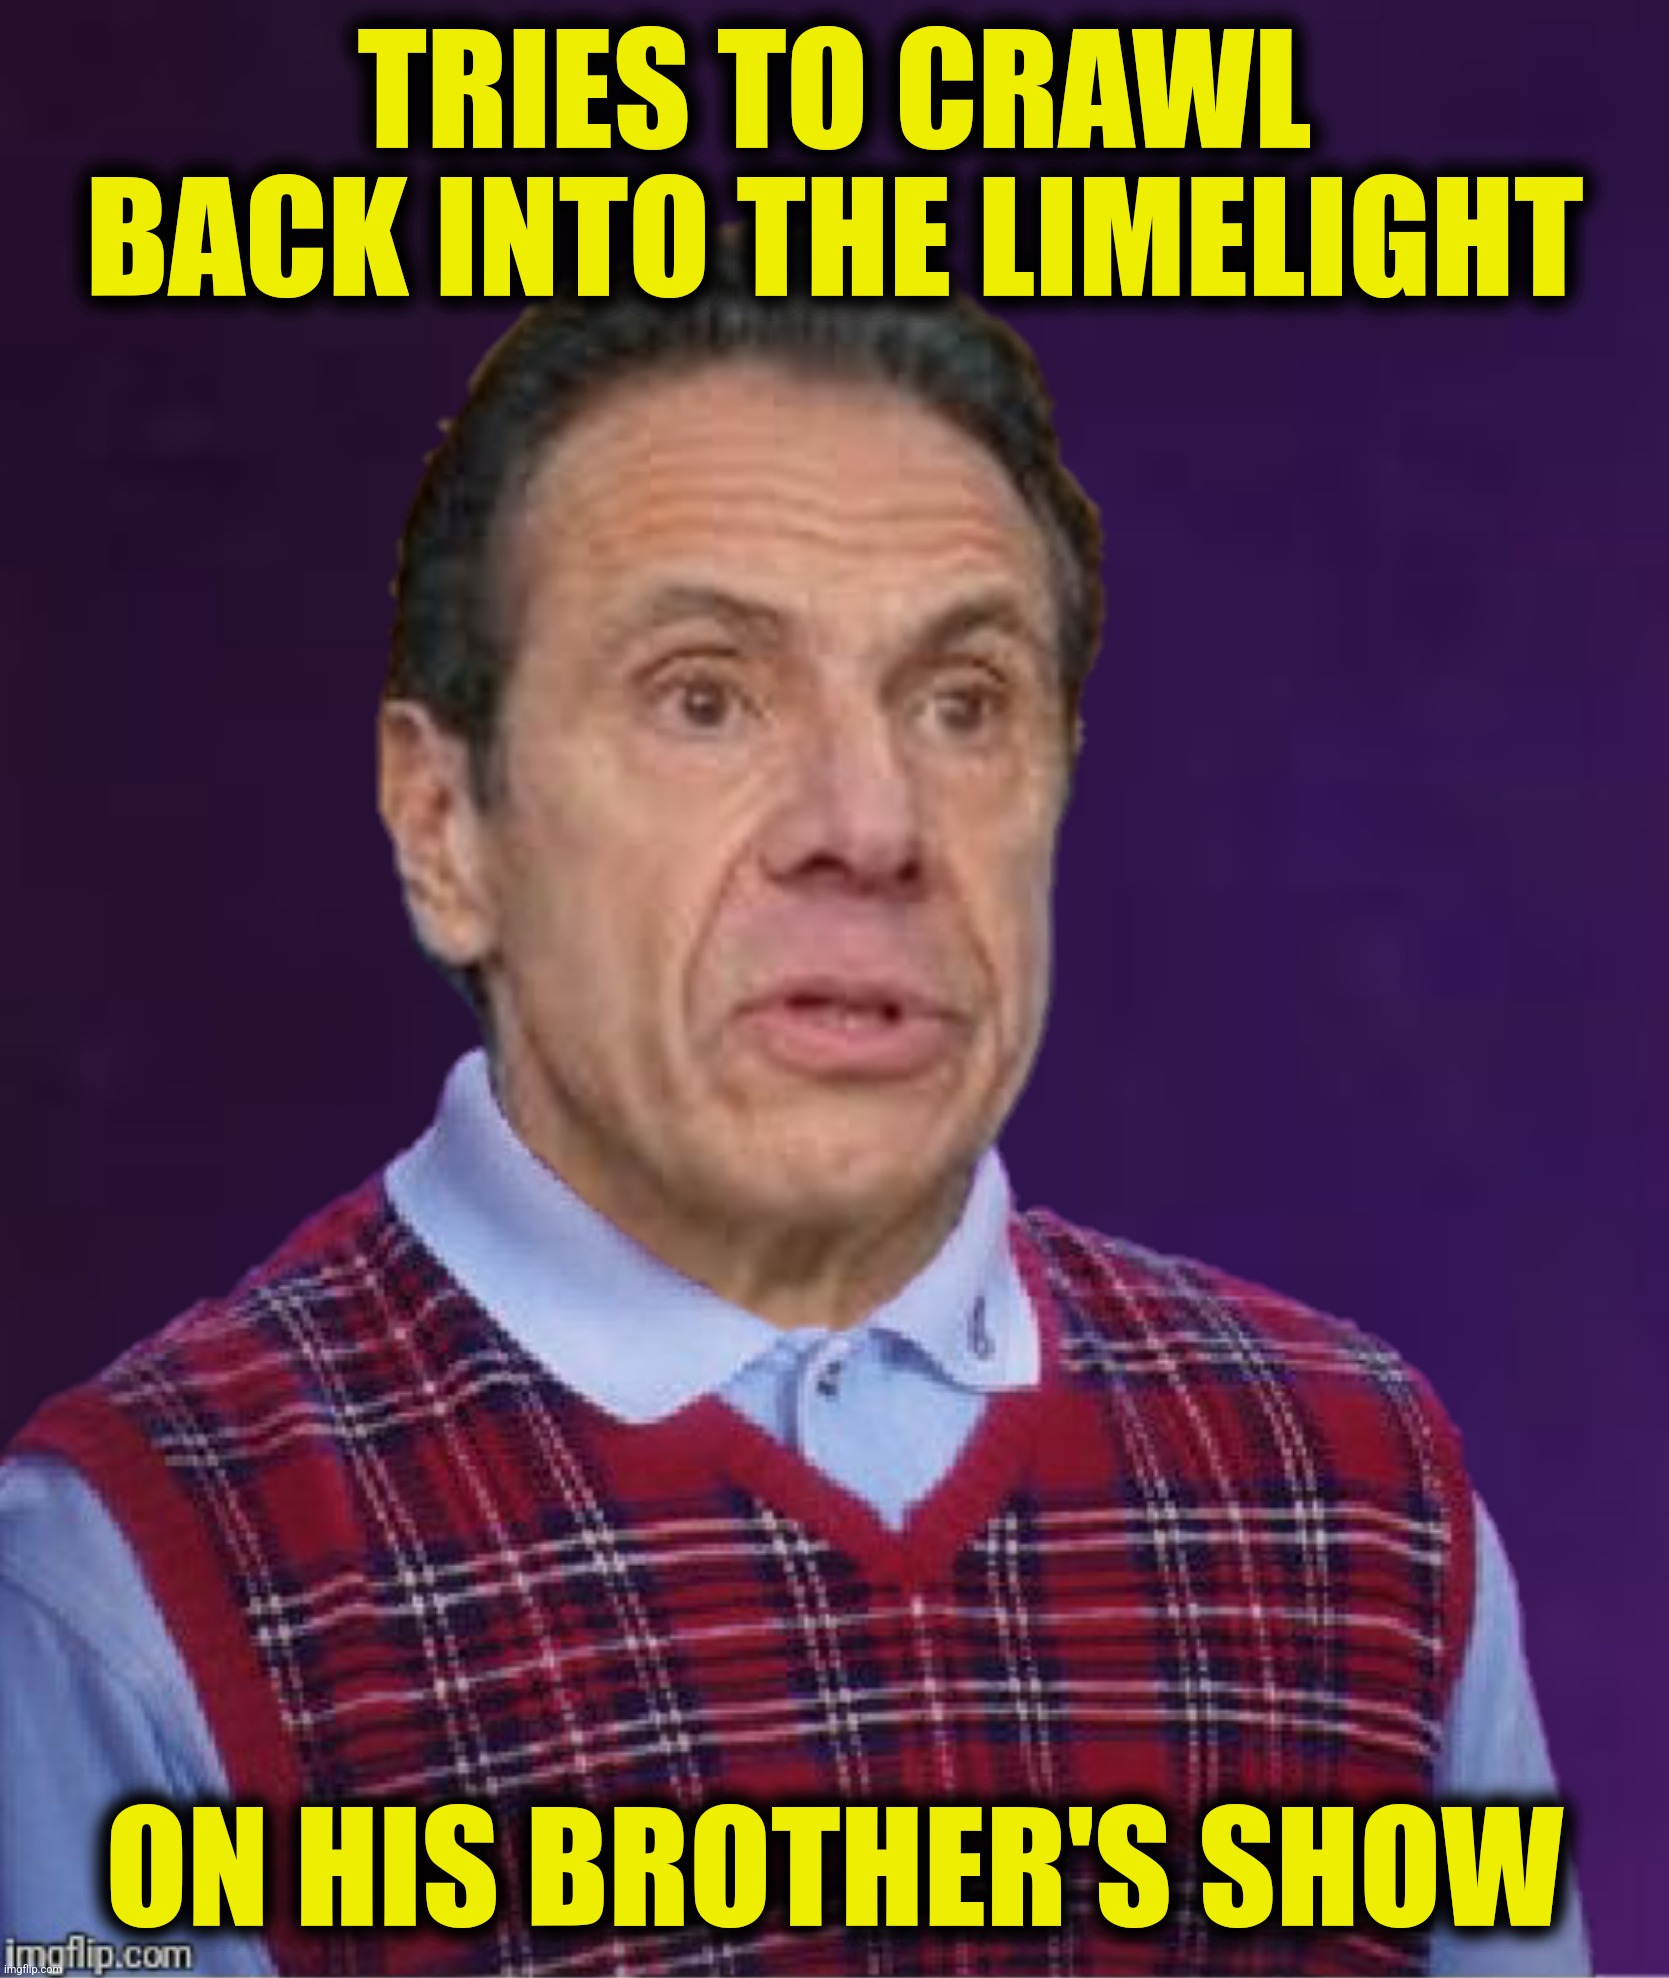 TRIES TO CRAWL BACK INTO THE LIMELIGHT ON HIS BROTHER'S SHOW | made w/ Imgflip meme maker